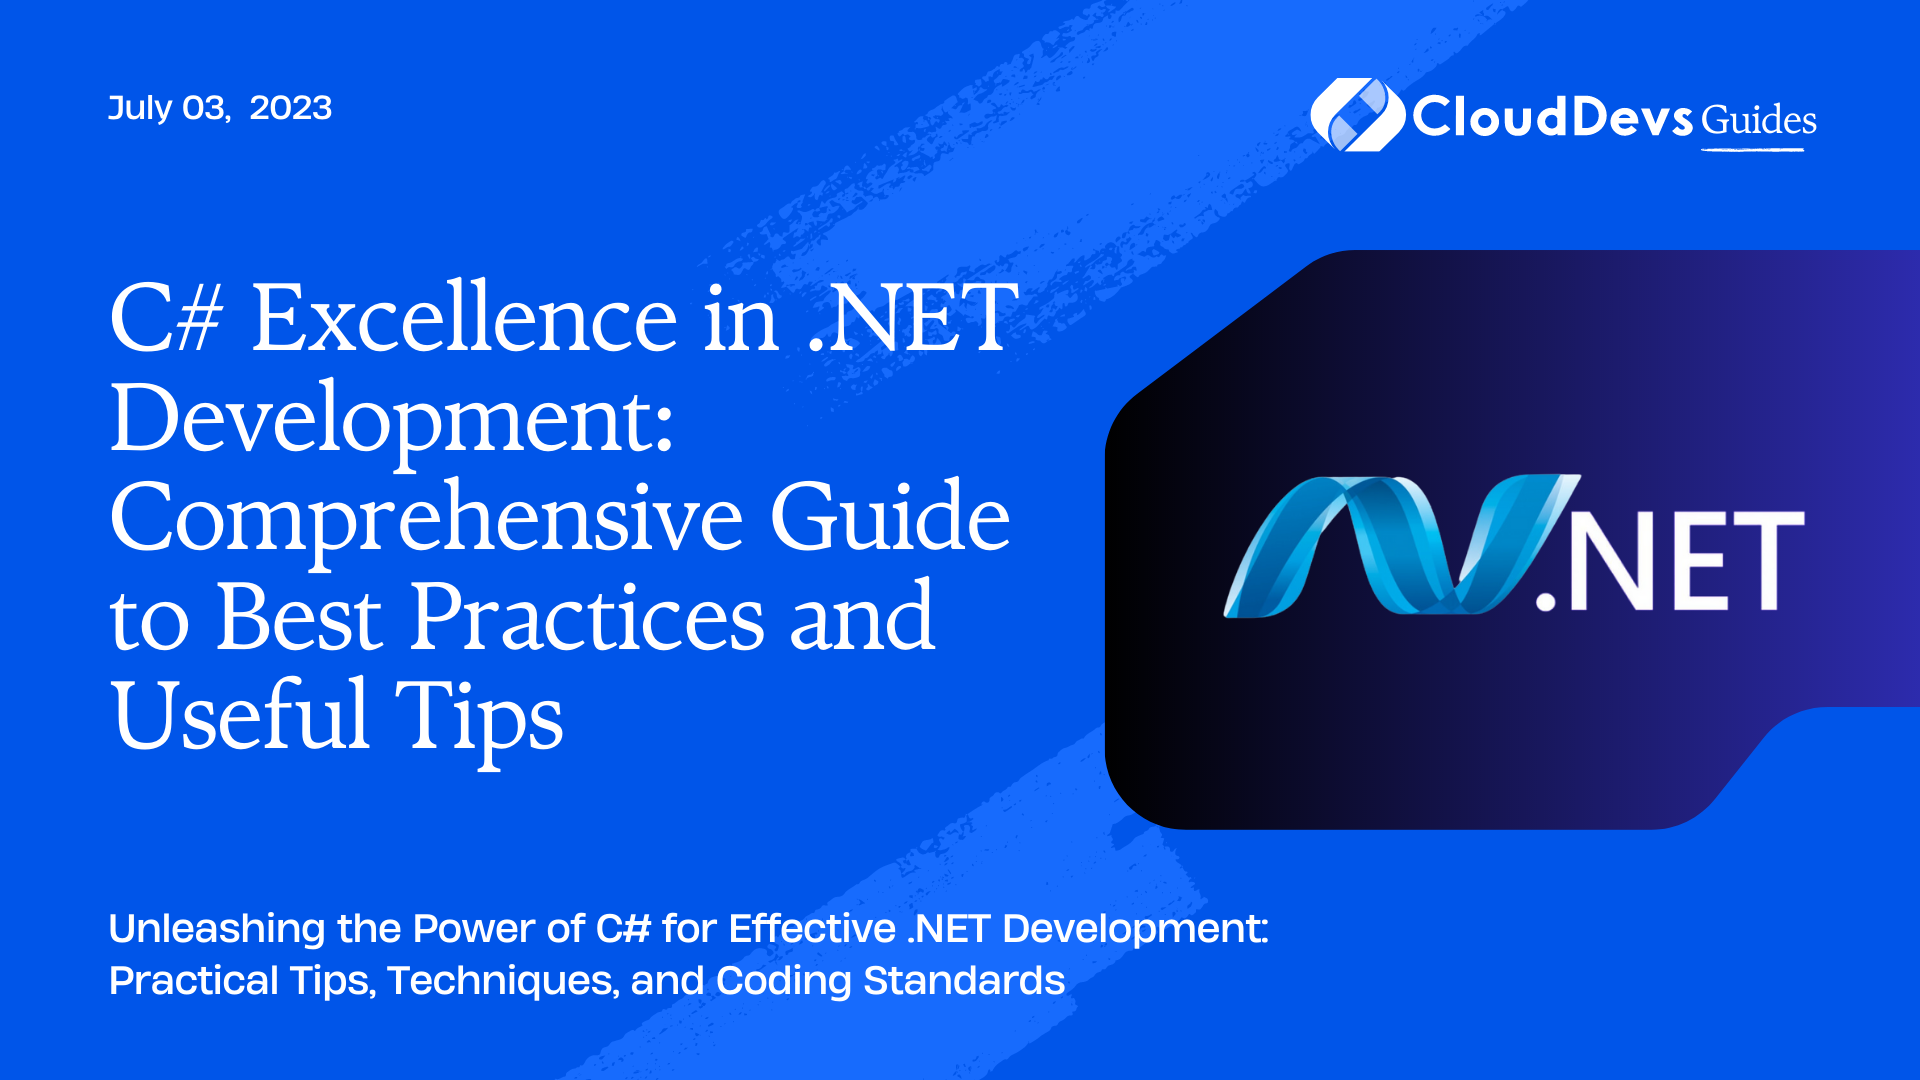 C# Excellence in .NET Development: Comprehensive Guide to Best Practices and Useful Tips